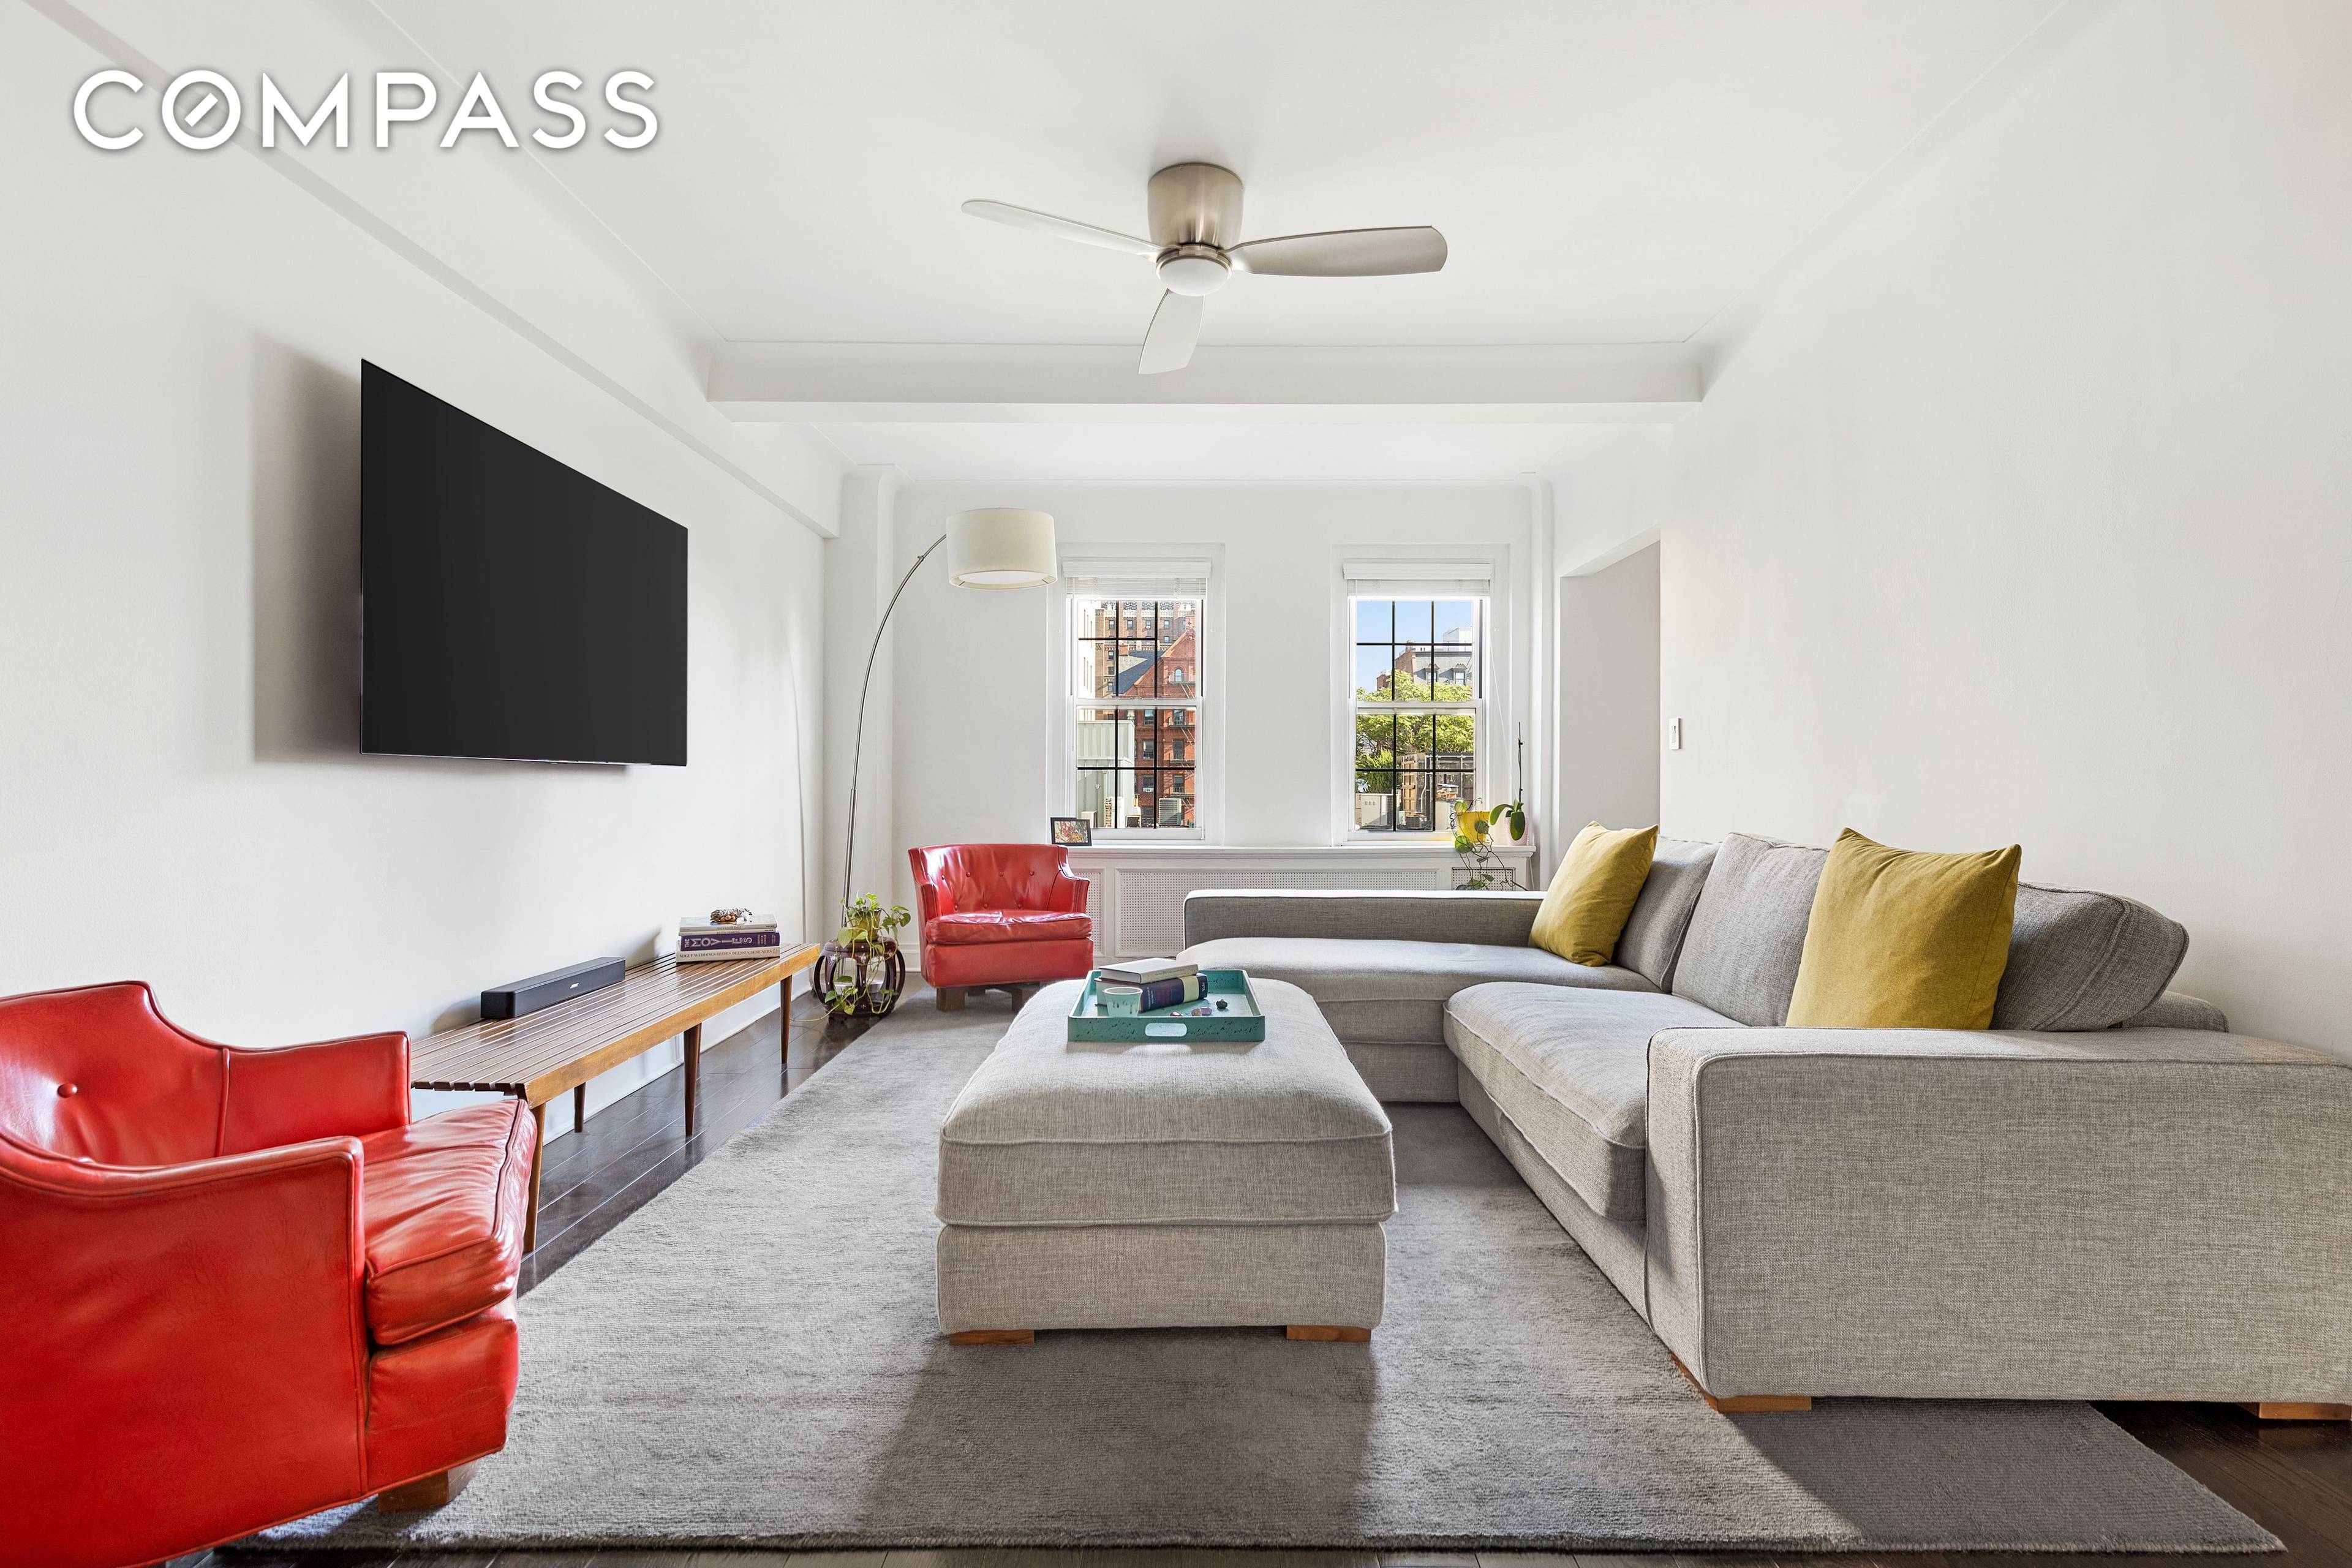 Residence 7AB is bright, airy, renovated two bedroom two bathroom home on a prime block in Brooklyn Heights.